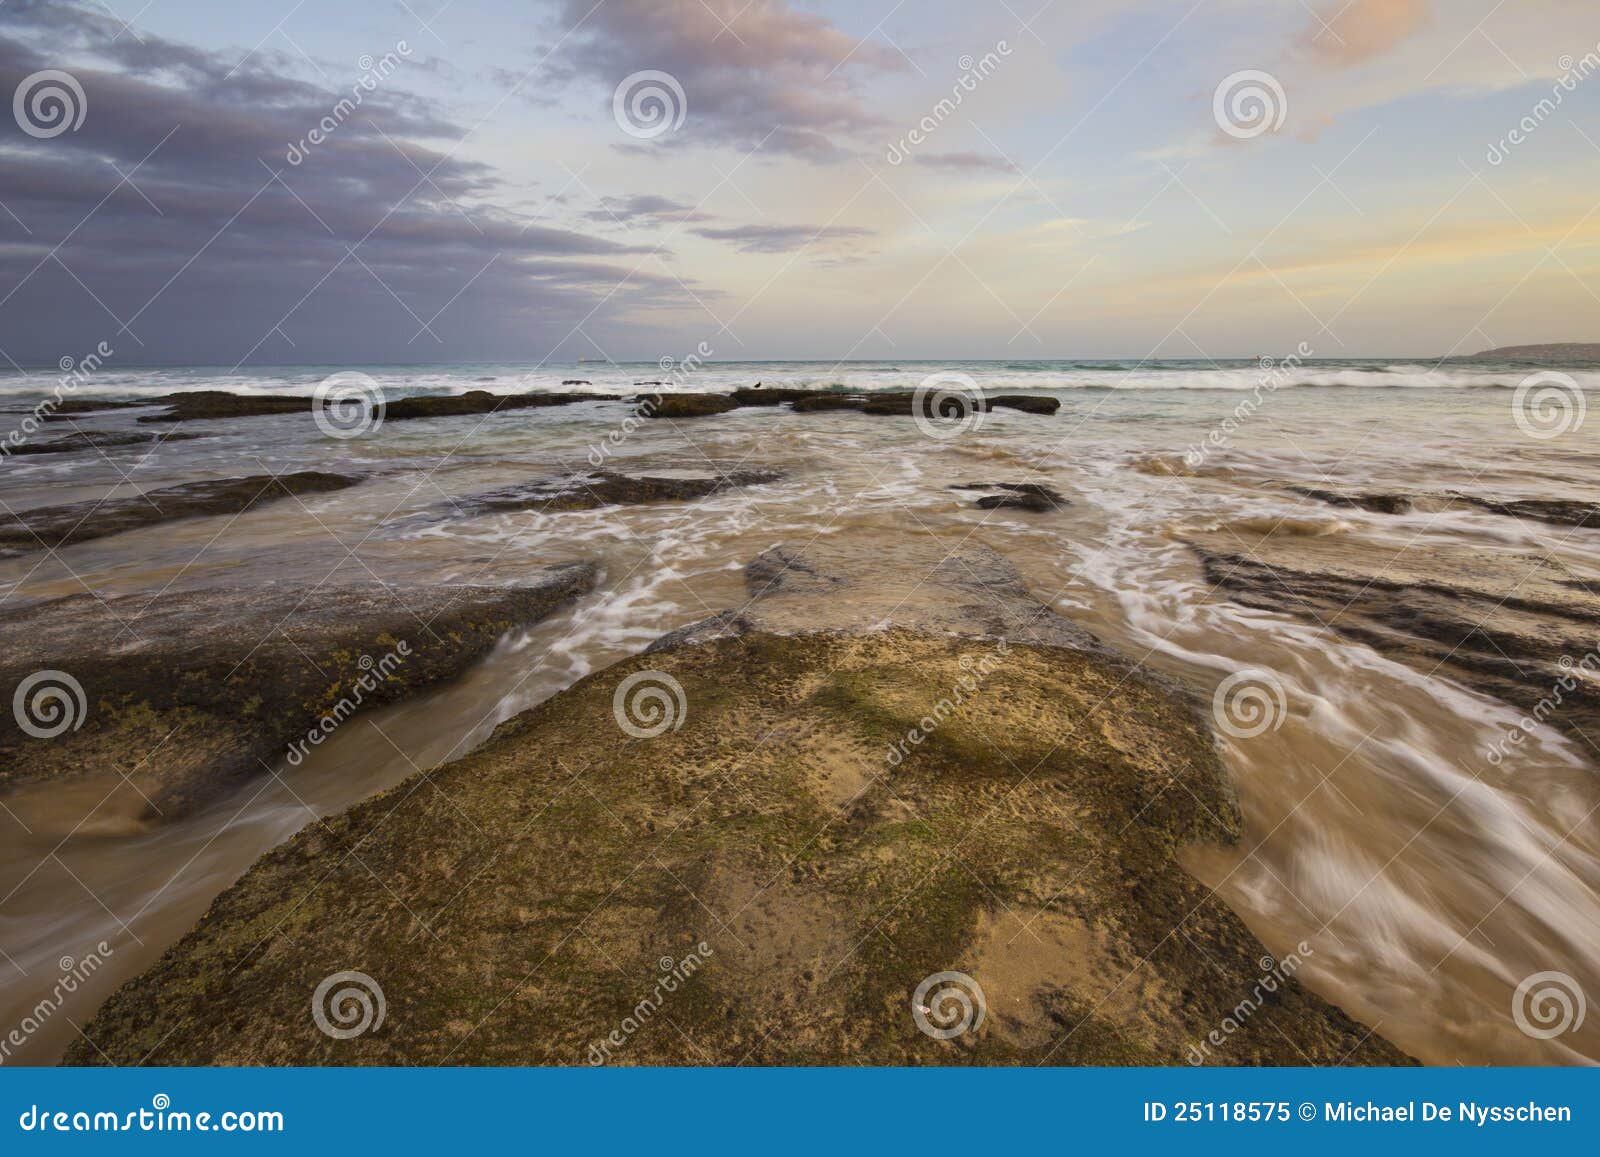 Ocean Sunset with Rushing Water Stock Image - Image of calm, beautiful